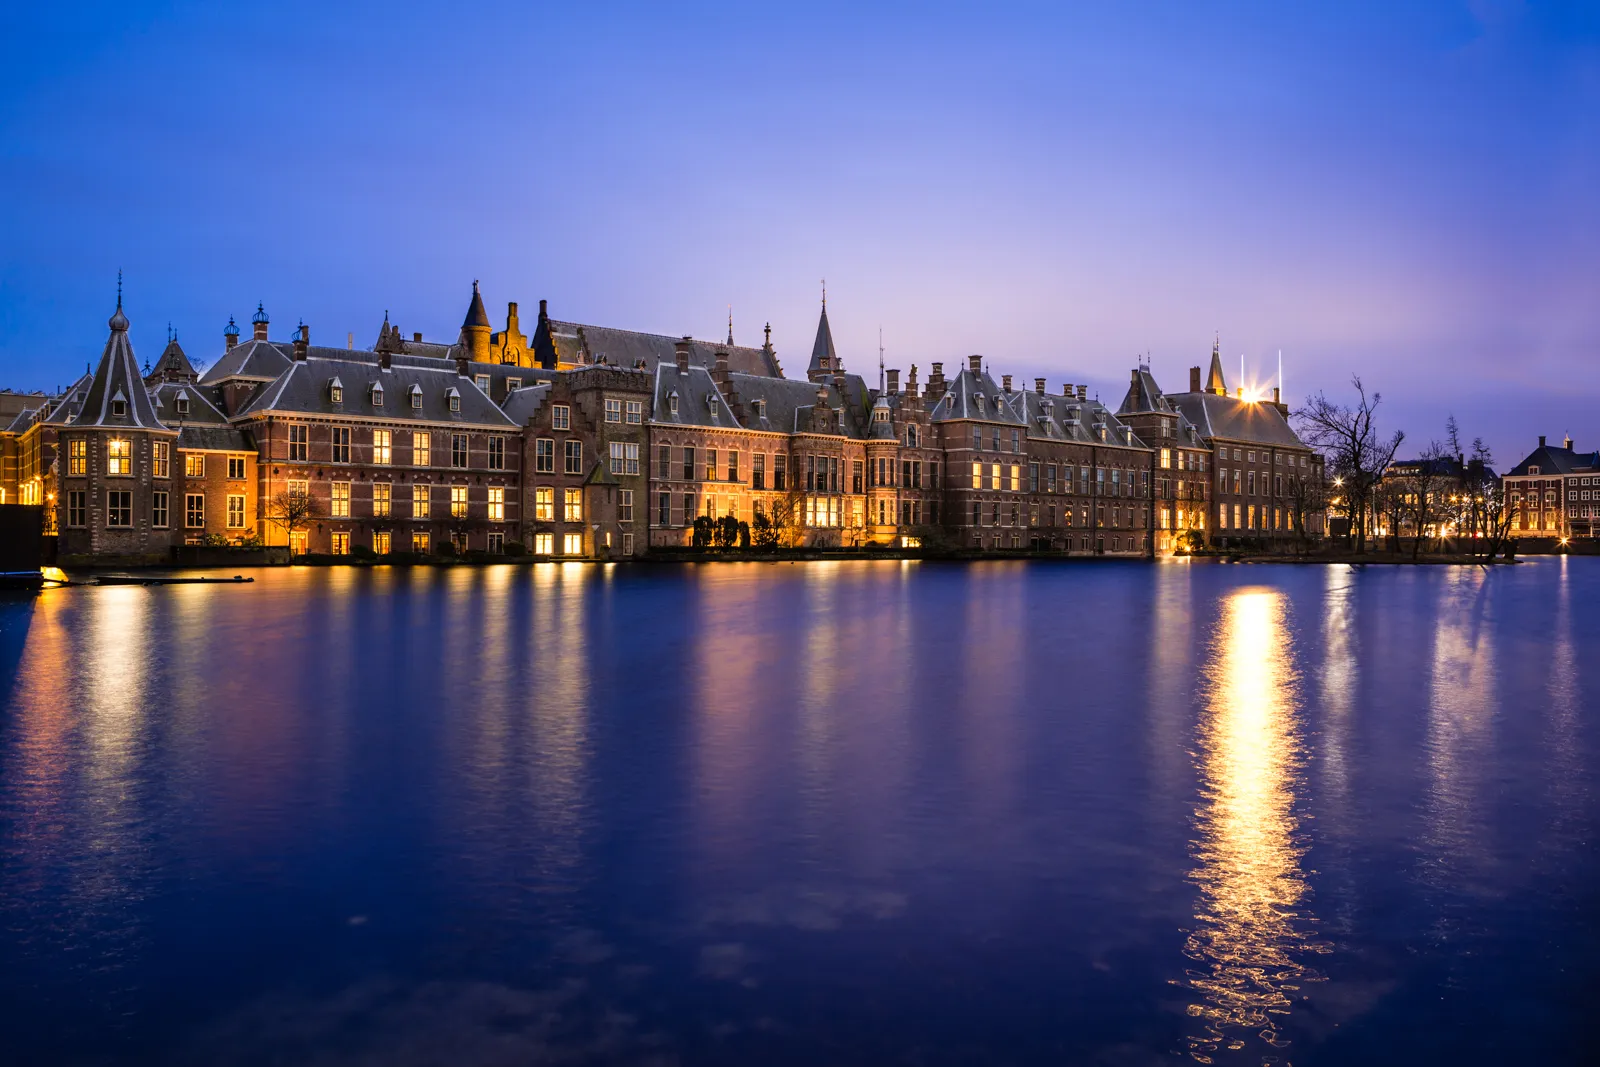 Photo showing: It's been very cloudy today, but luckily the sky tends to color very nicely at this time of day. Enjoy!
The Binnenhof (Dutch, literally "inner court"), is a complex of buildings in The Hague. It has been the location of meetings of the Staten-Generaal, the Dutch parliament, since 1446, and has been the center of Dutch politics for many centuries.
(Source: Wikipedia)

Absolutely best on black.